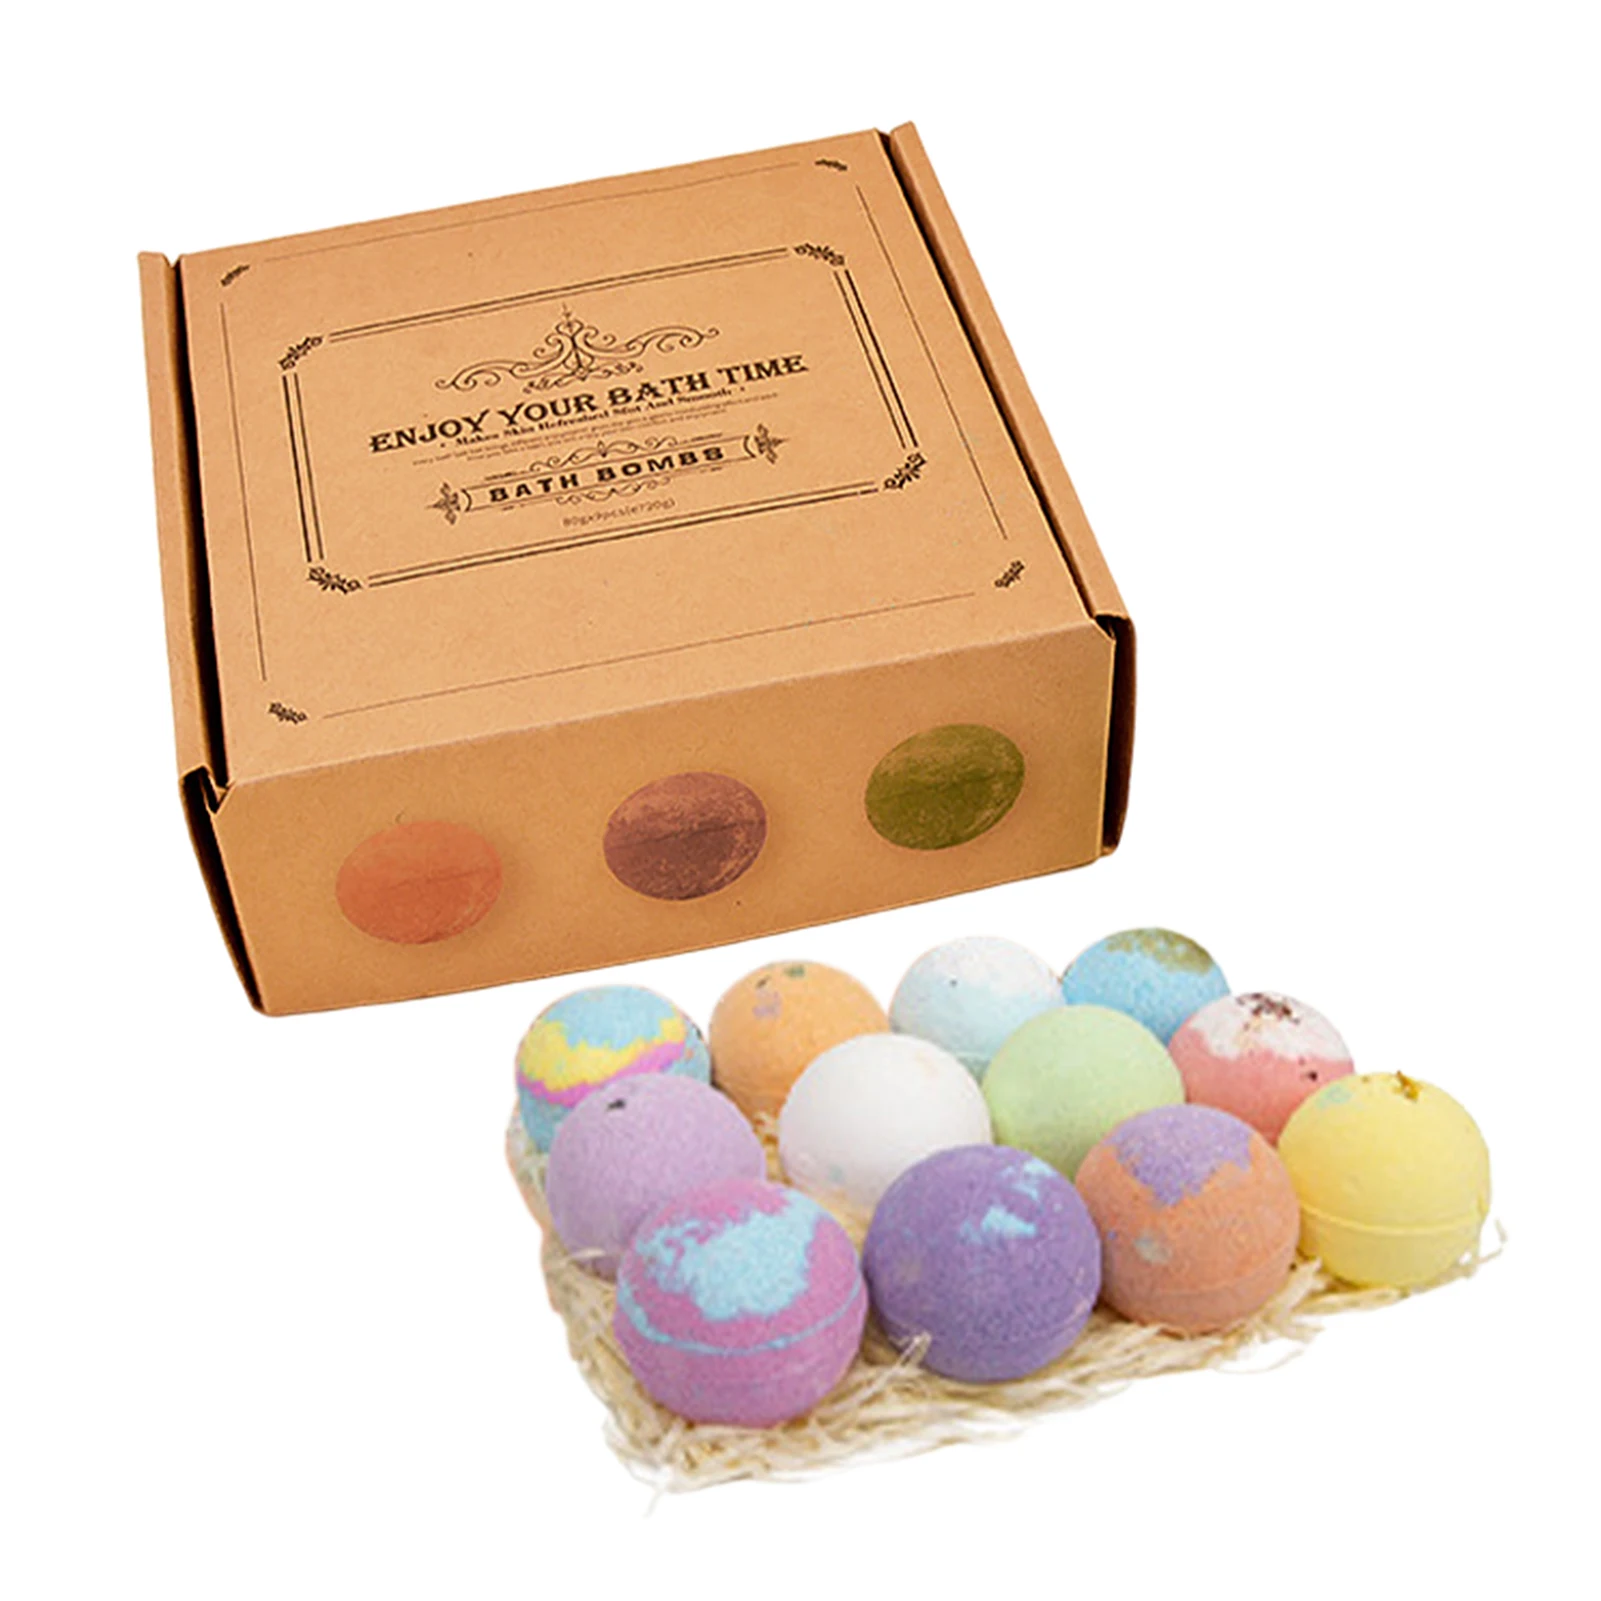 

Shower Bombs Aromatherapy Gift Set Bath Salts For Women Relaxing 12 Scents Bath Salt Balls Crafted From Salt And Essential Oils